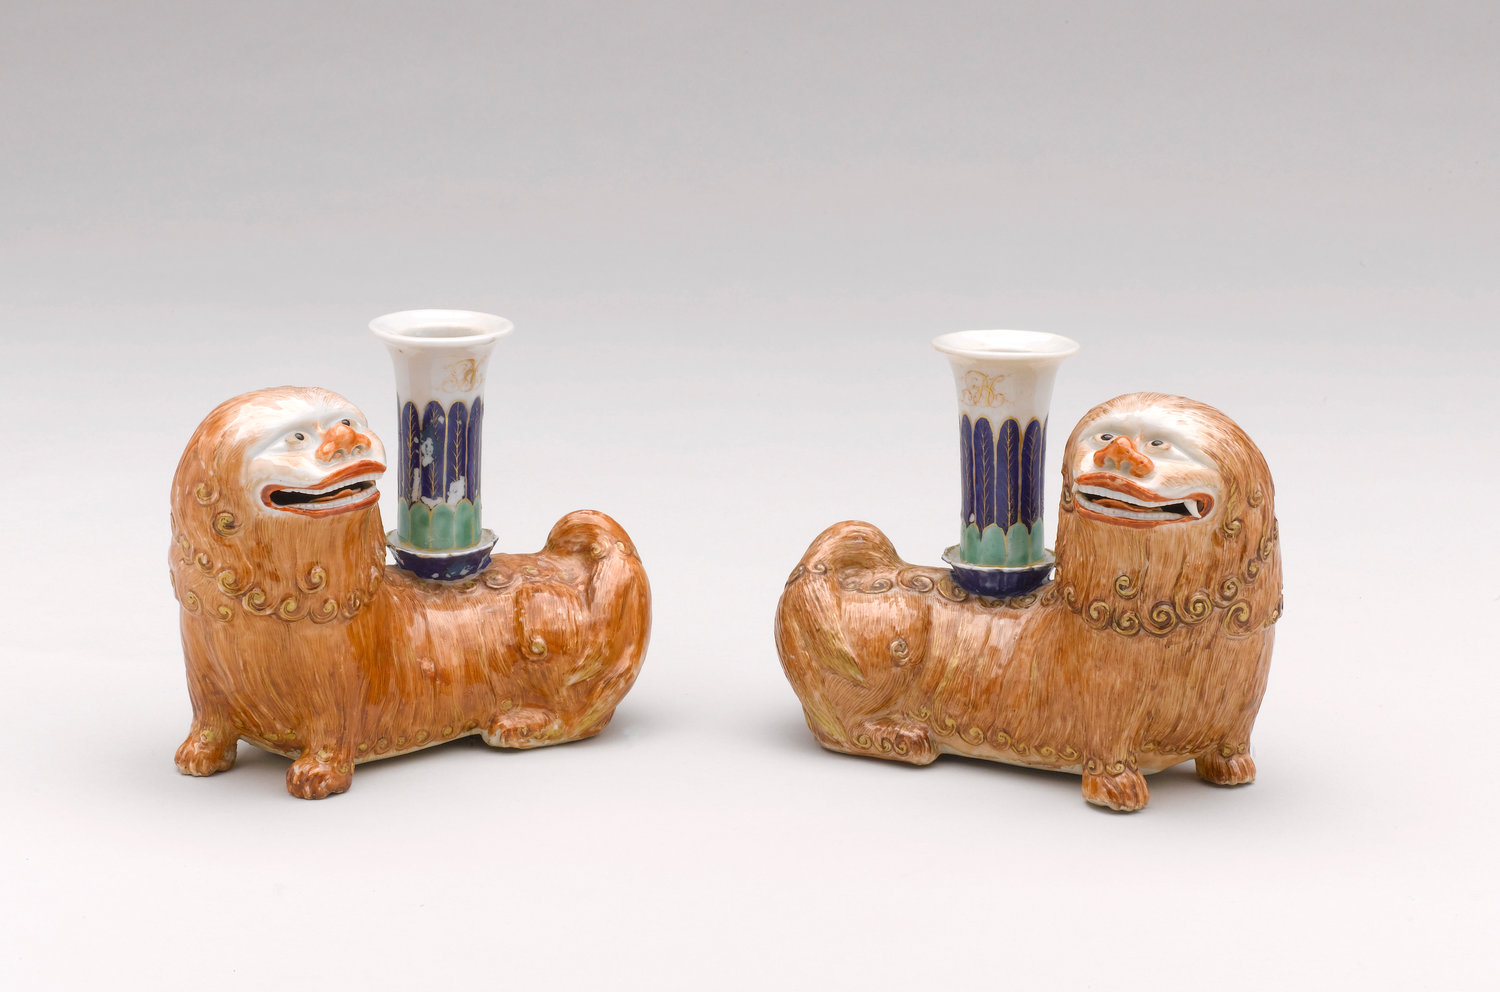 Guardian Lion candlesticks brought to Nantucket from China following a trading voyage.